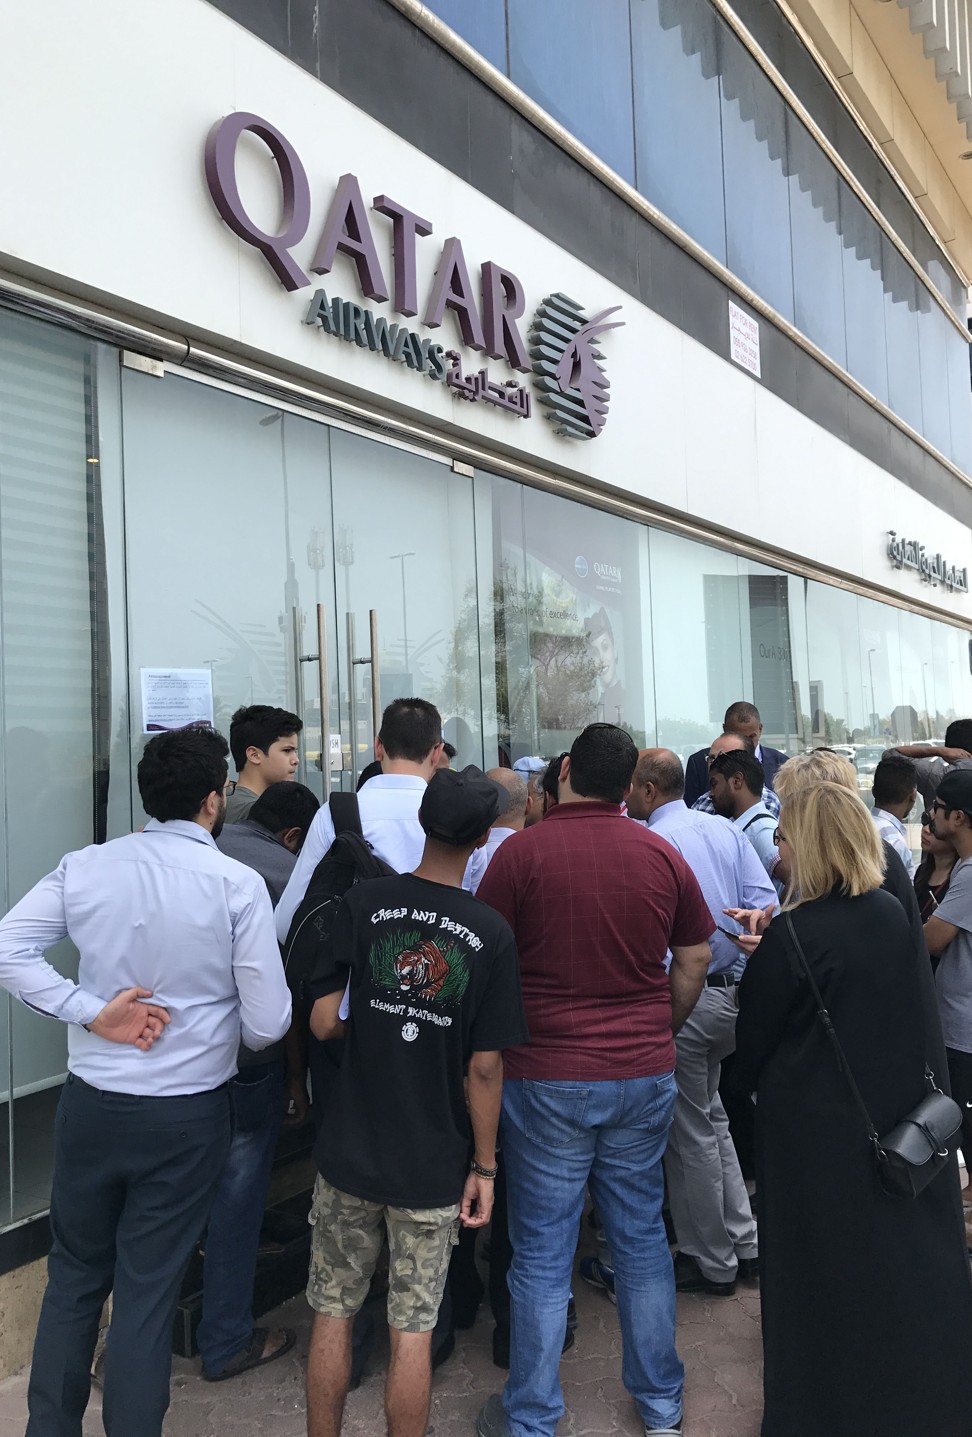 People gather outside a branch of Qatar Airways in the United Arab Emirate of Abu Dhabi on June 6, 2017, a day before the UAE cut diplomatic ties with Qatar and gave Qataristwo weeks to leave the country. Photo: Agence France-Presse